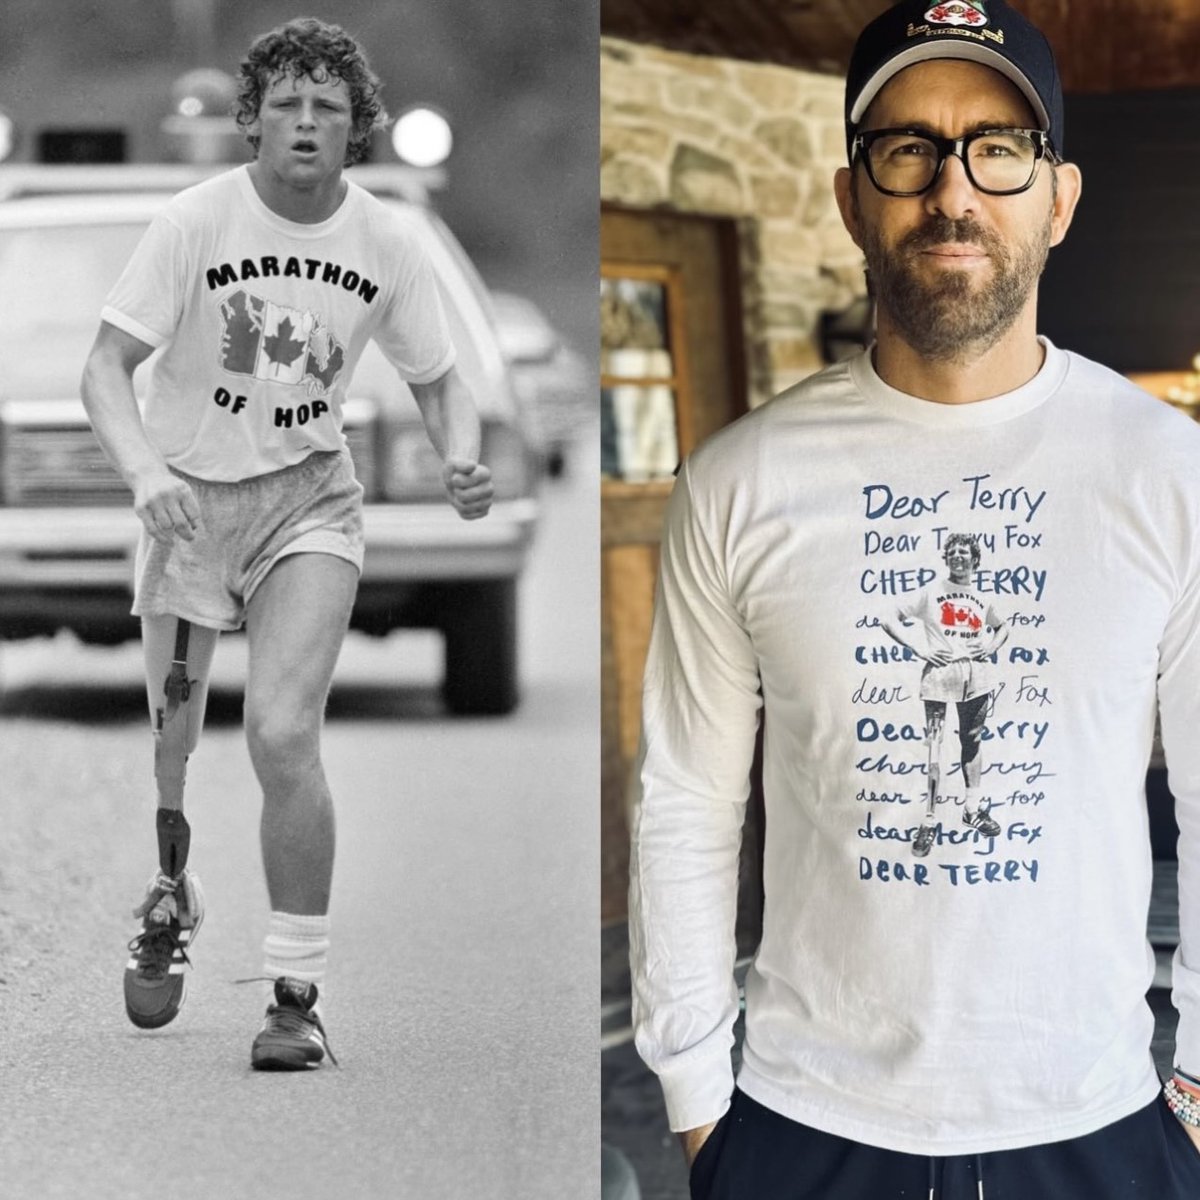 Ok, we heard you! Due to overwhelming demand, our first-ever PRE-SALE is now live! Pre-order your #TerryFoxRun shirt now: terryfox.org/presale #DearTerry @VancityReynolds